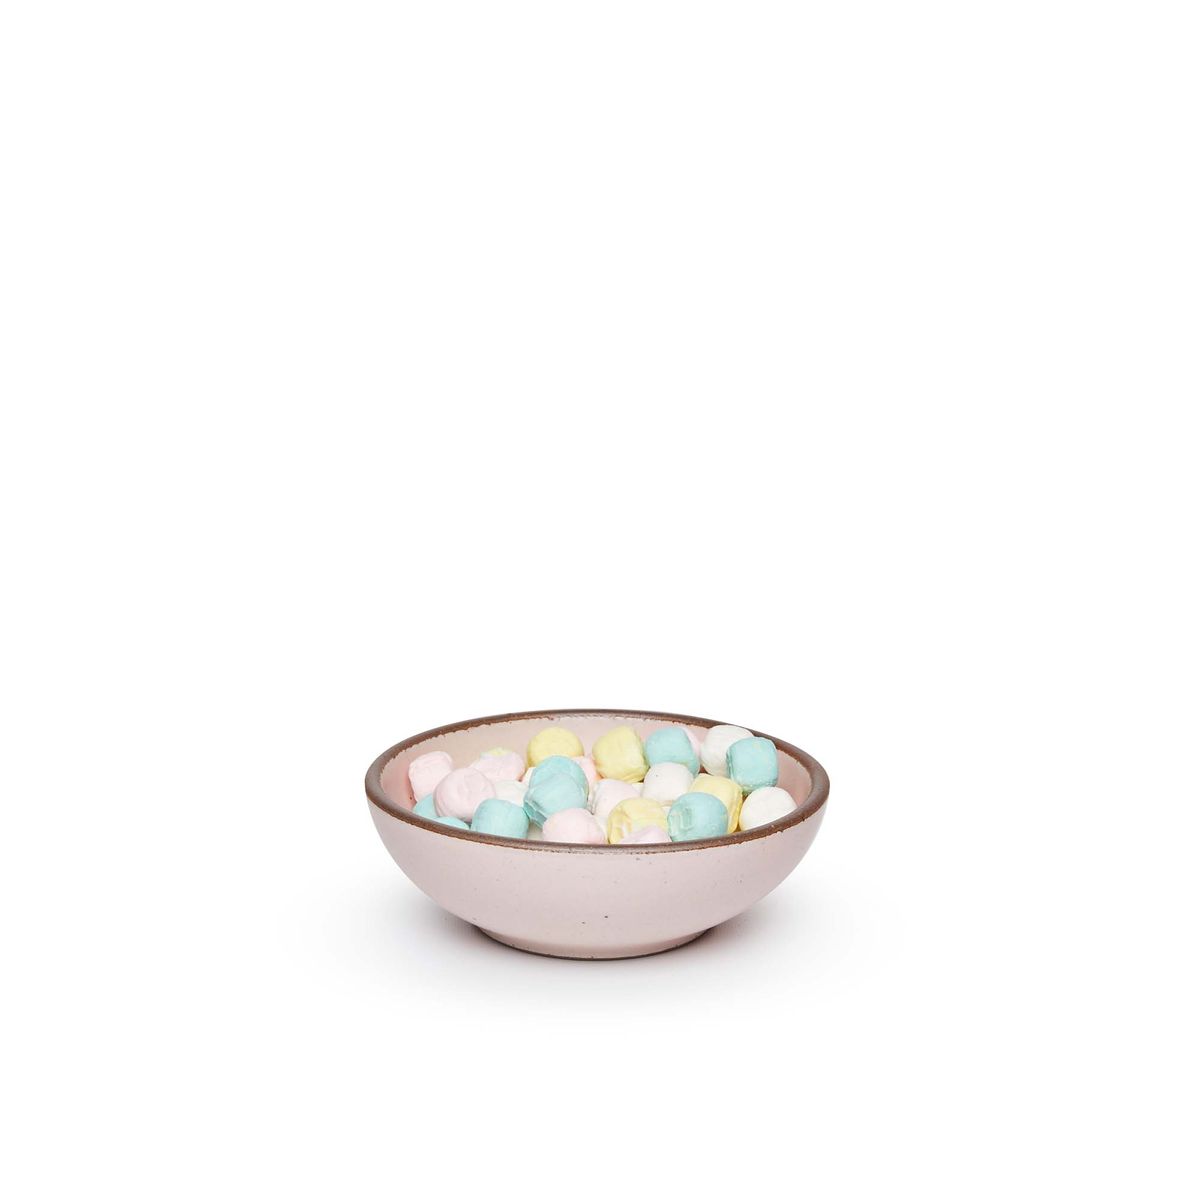 A small shallow ceramic bowl in a soft light pink color featuring iron speckles and an unglazed rim, filled with pastel marshmallows